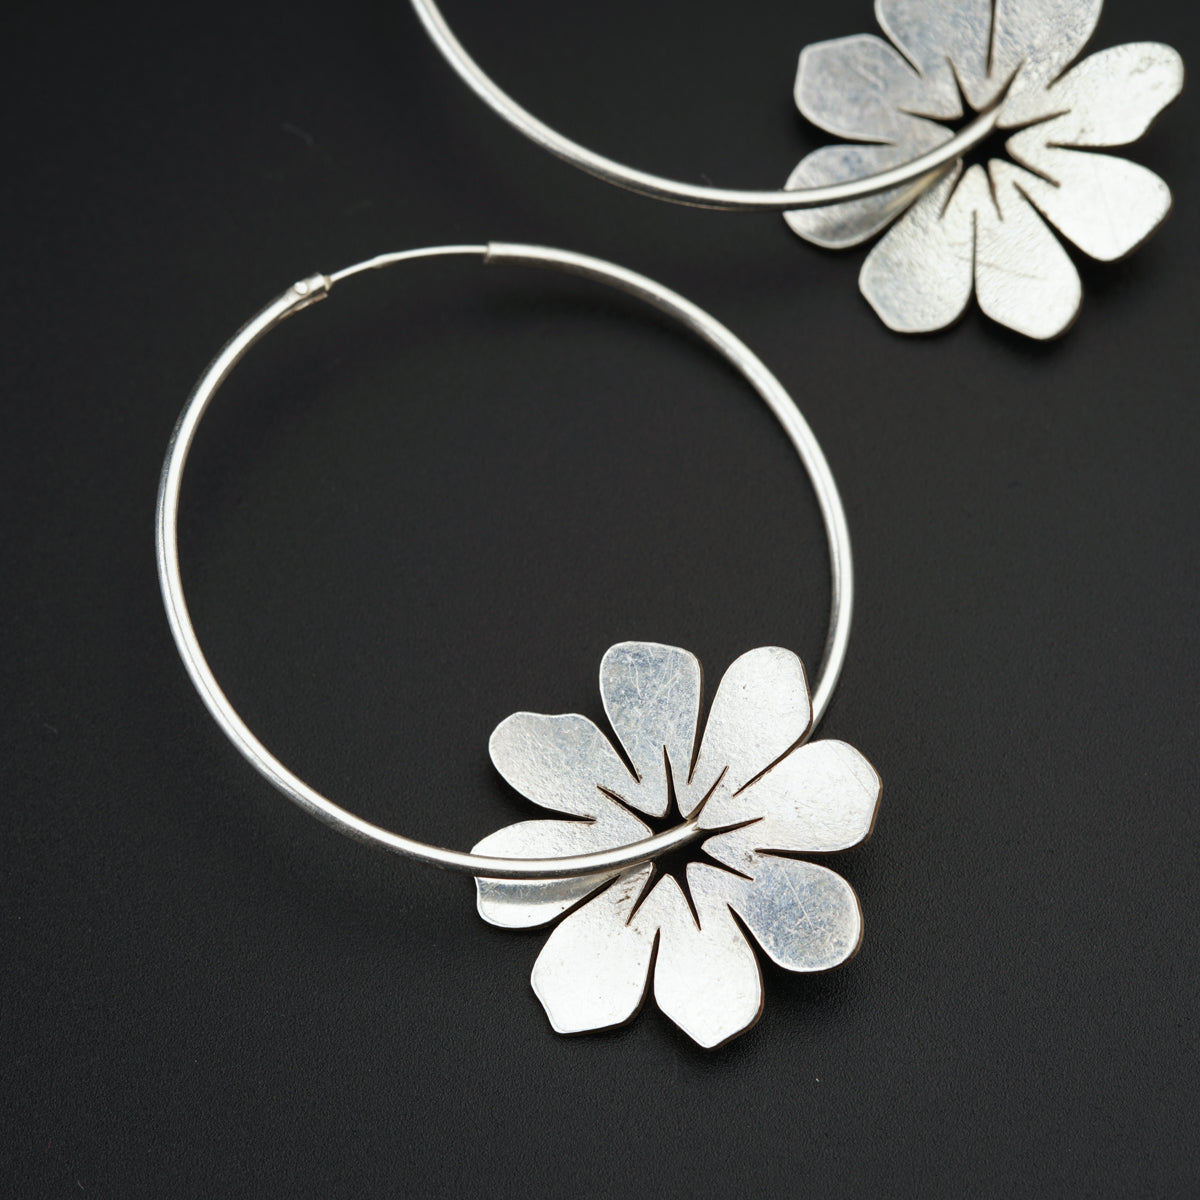 a pair of silver hoop earrings with flowers on them